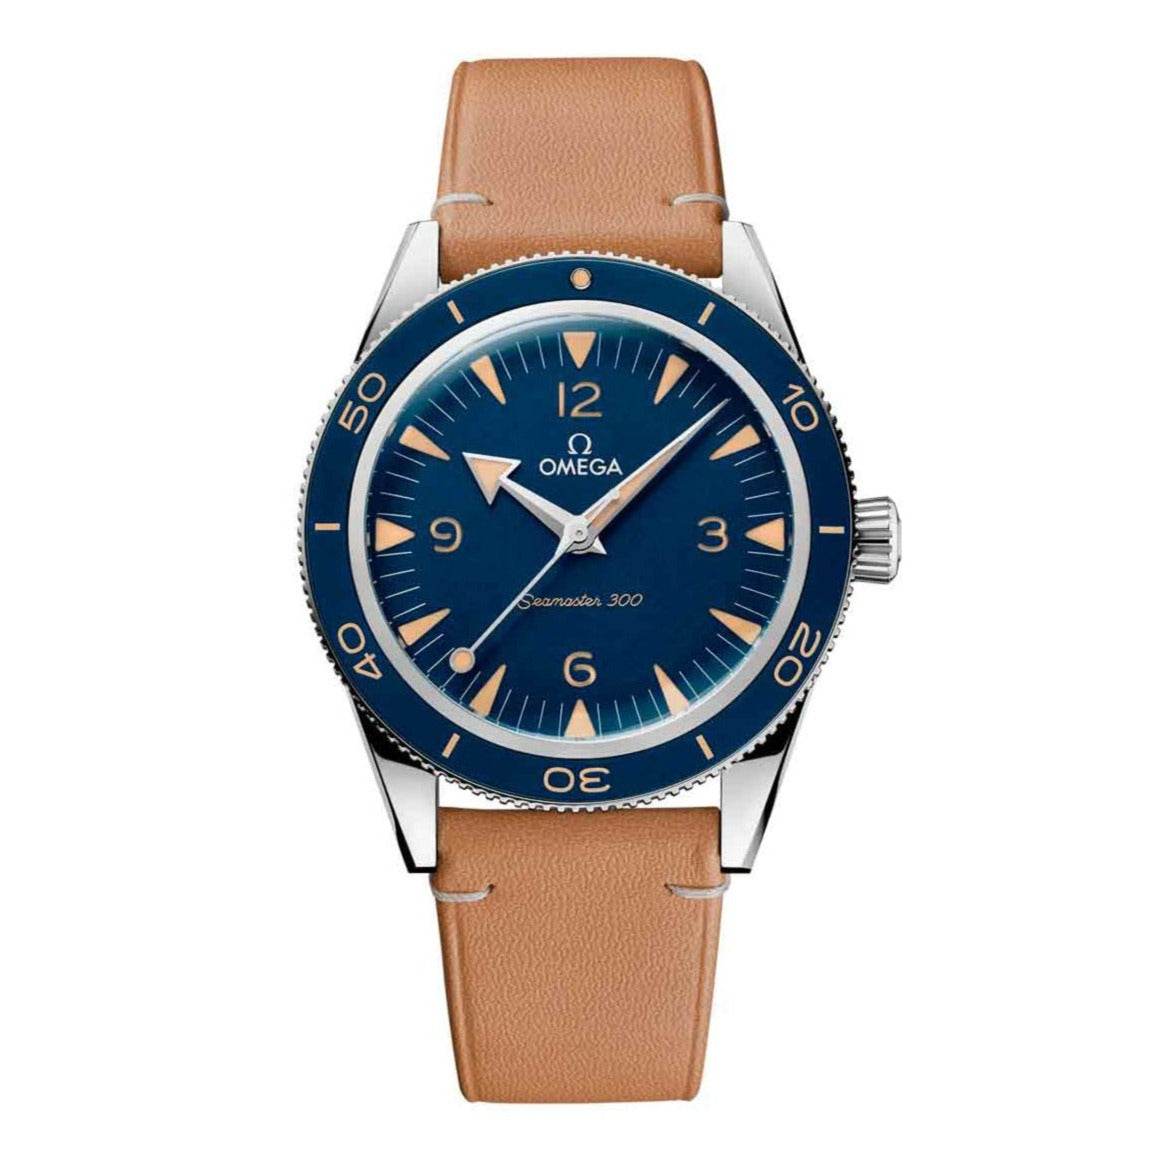 Omega Seamaster Watch for Men with Blue Dial Presented on Beige Leather Strap